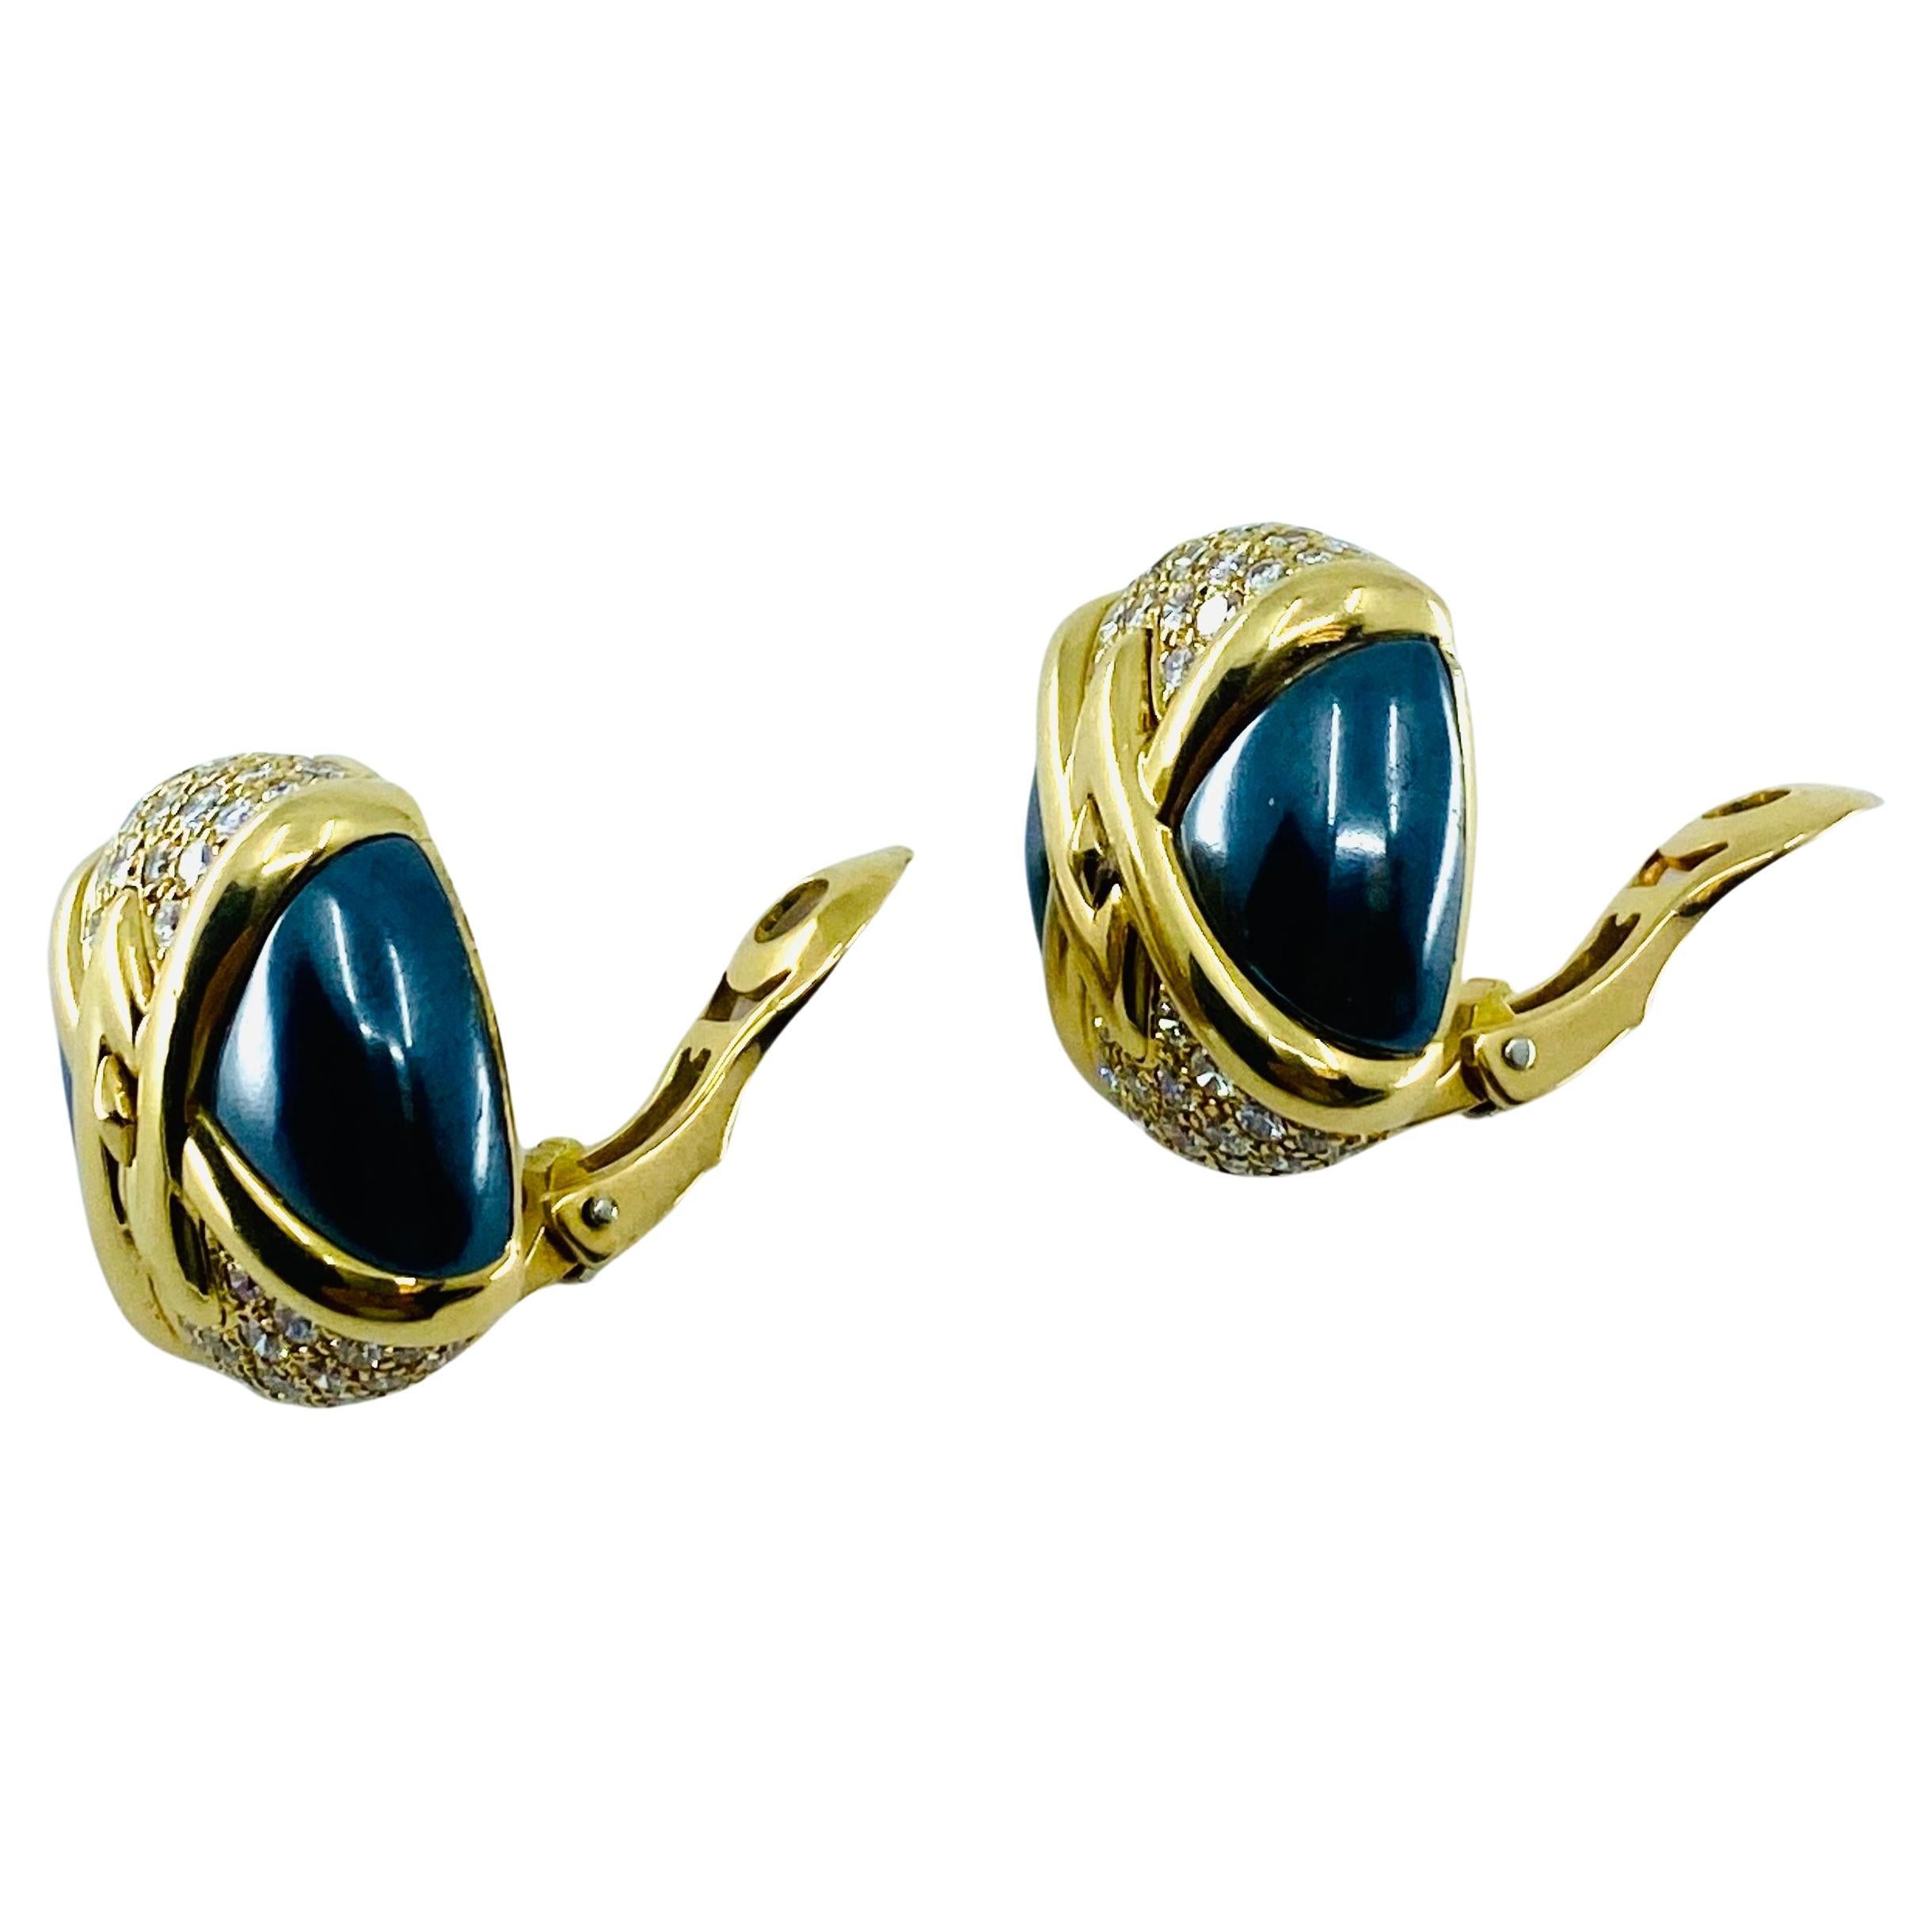  Bulgari Diamond Hematite 18K Gold Earrings  In Excellent Condition For Sale In Beverly Hills, CA